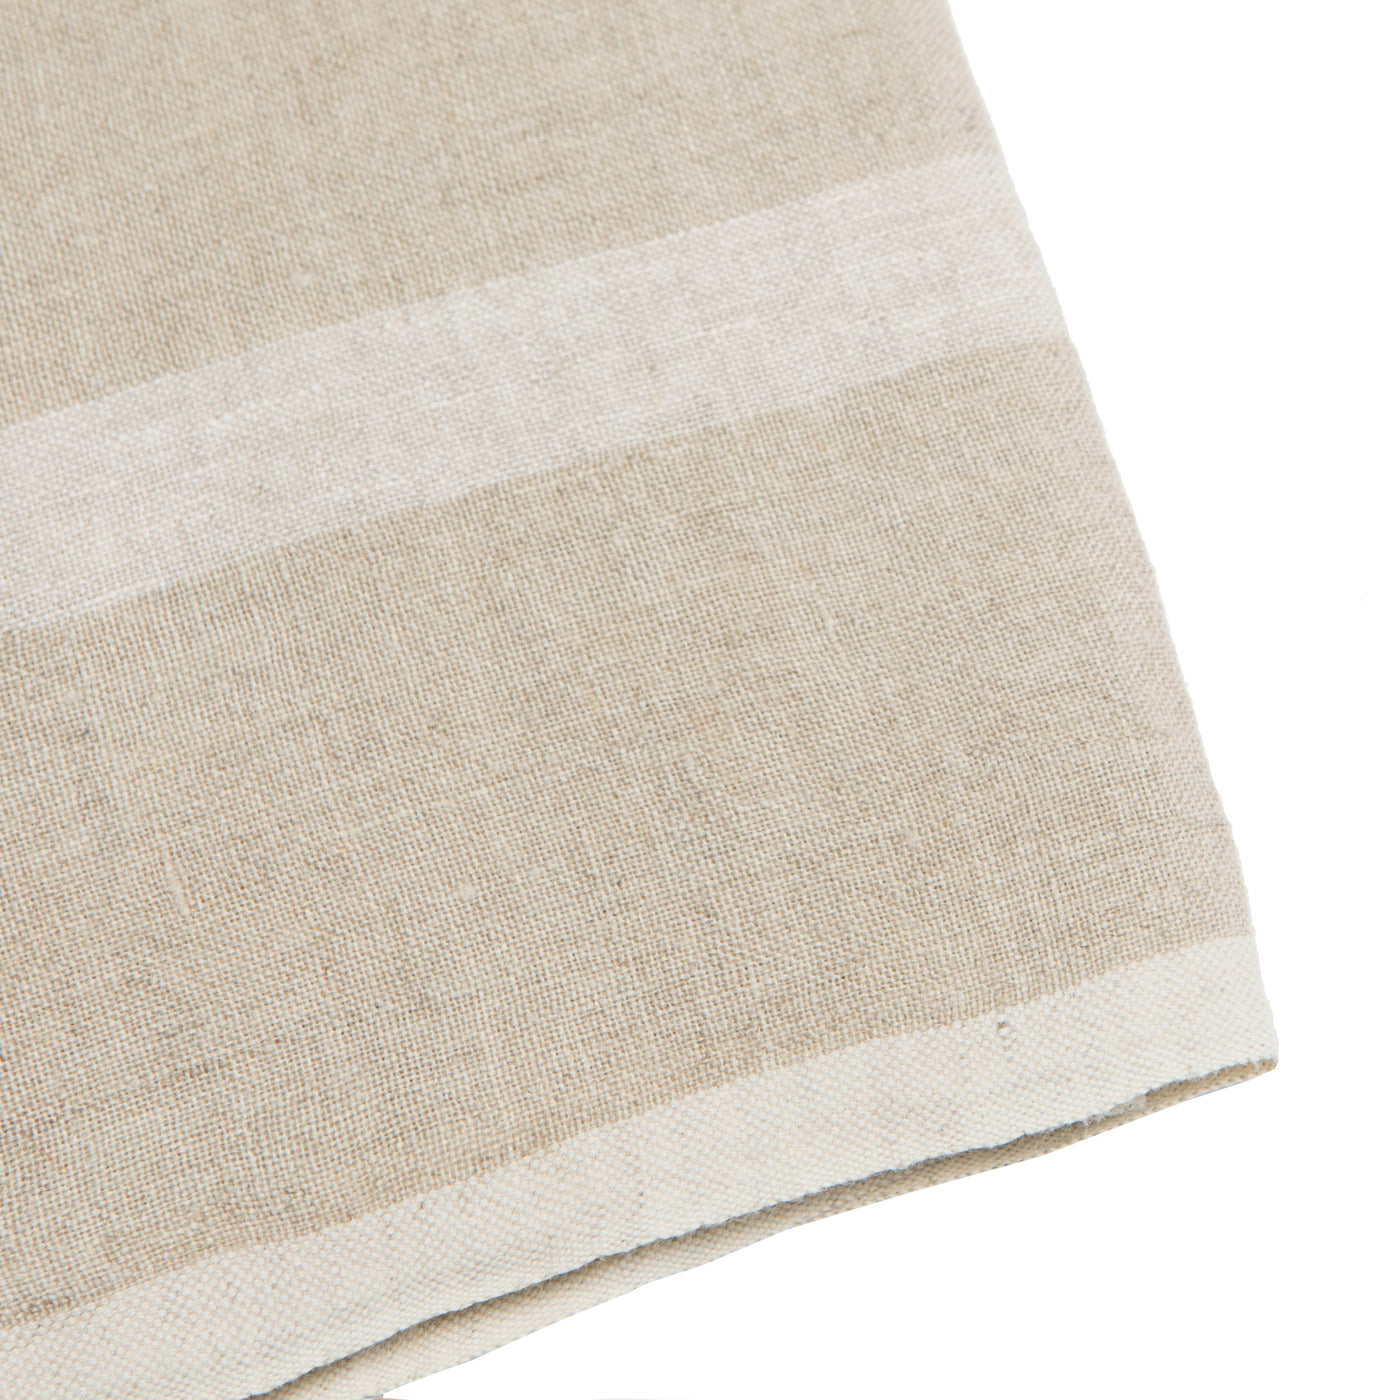 Laundered Linen Kitchen Towels Natural & White, Set of 2